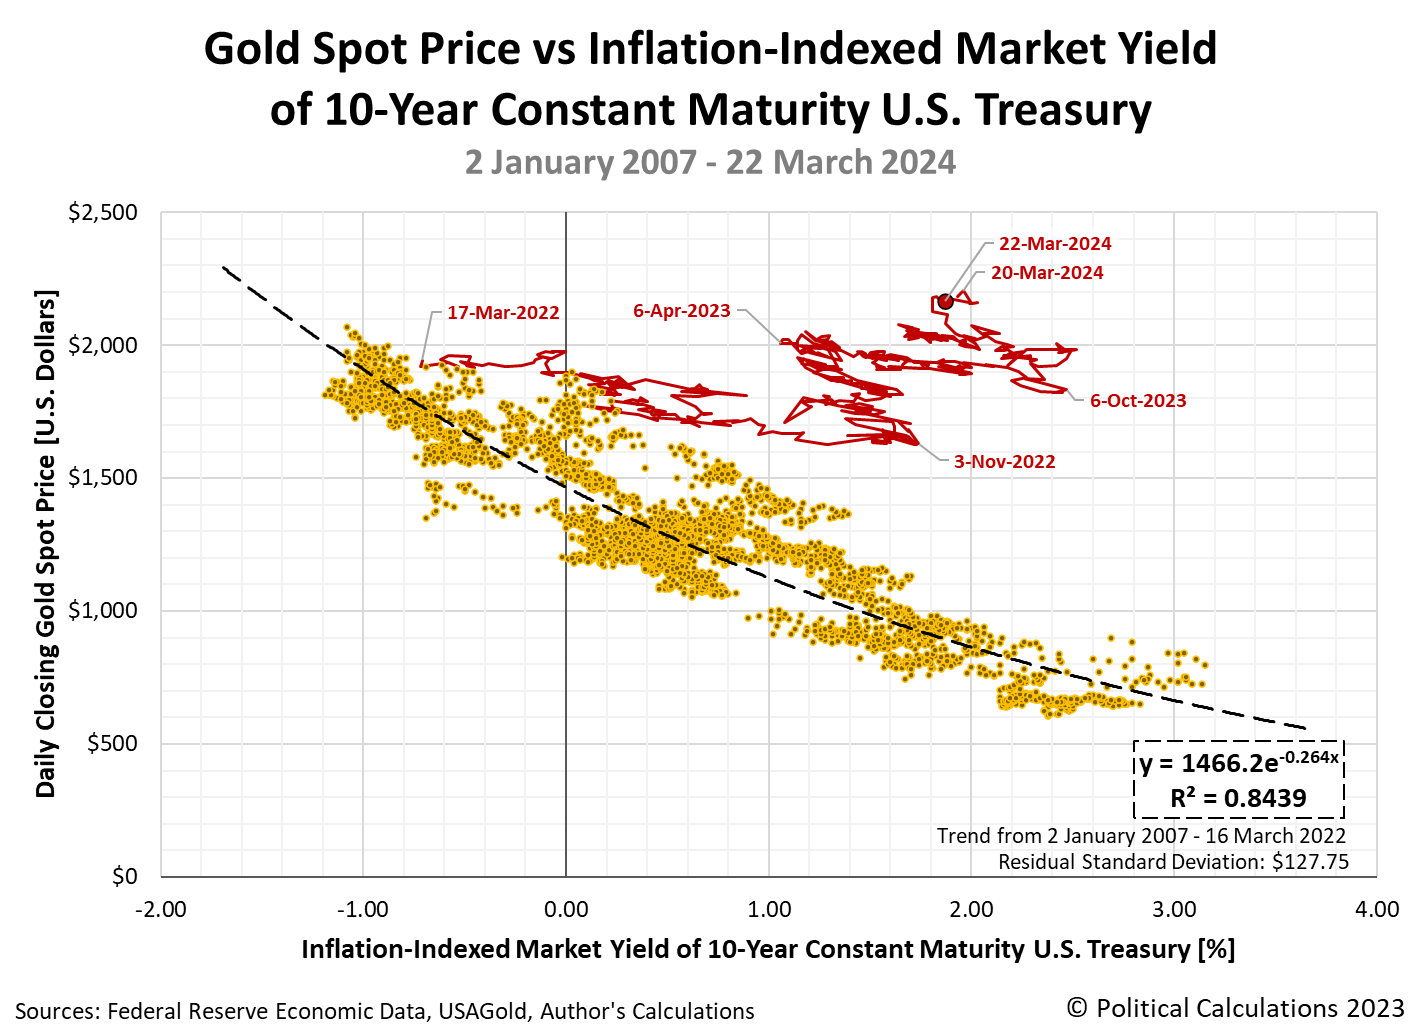 Gold Spot Price vs Inflation-Indexed Market Yield of 10-Year Constant Maturity U.S. Treasury, 2 January 2007 - 22 March 2024